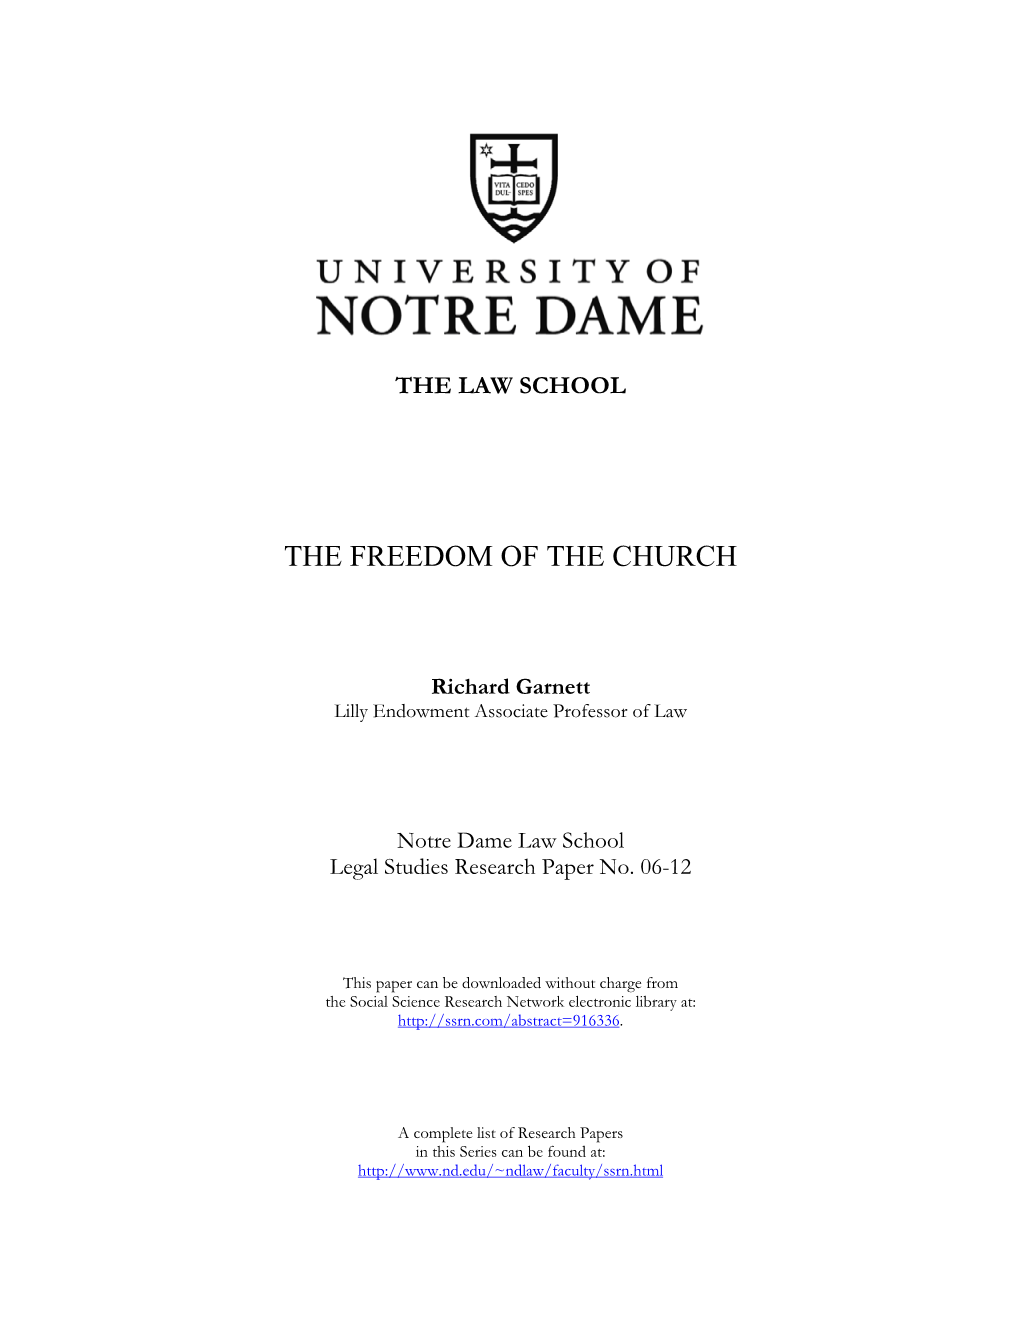 The Freedom of the Church